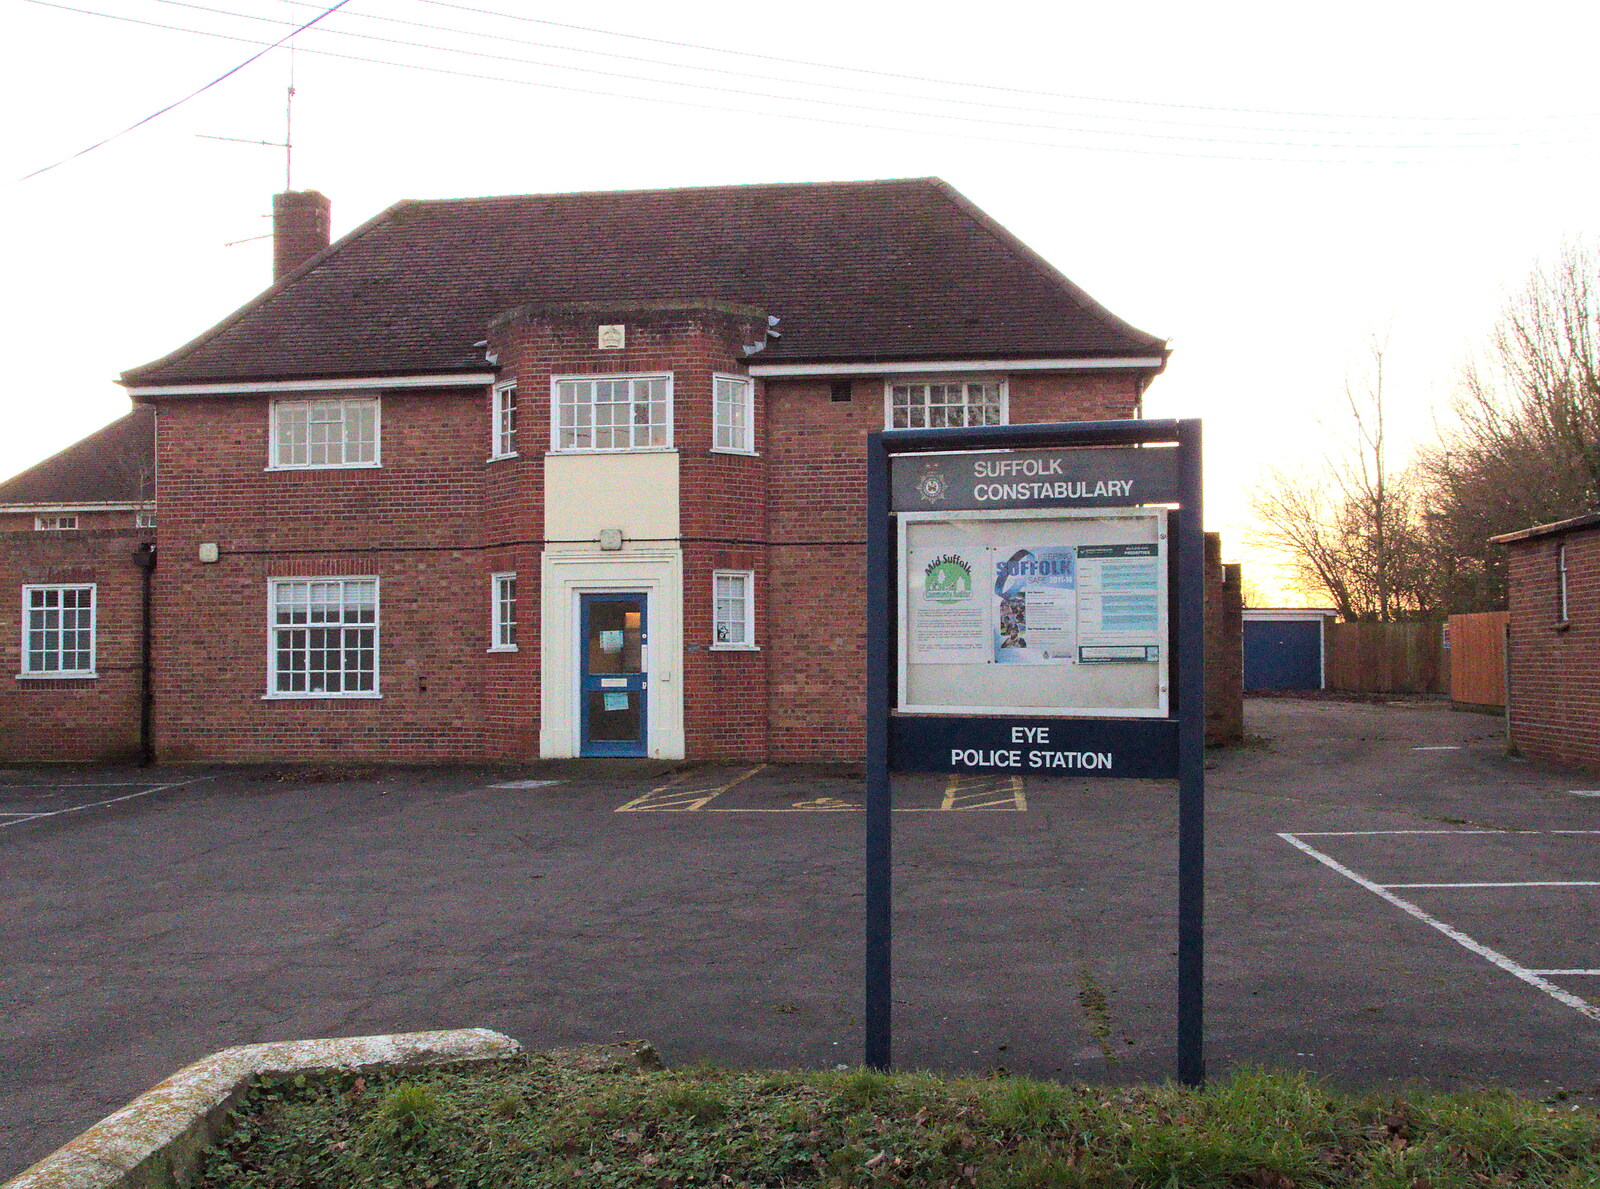 Eye Police Station and notice board from Closing Down: A Late January Miscellany, Diss, Norfolk - 31st January 2015